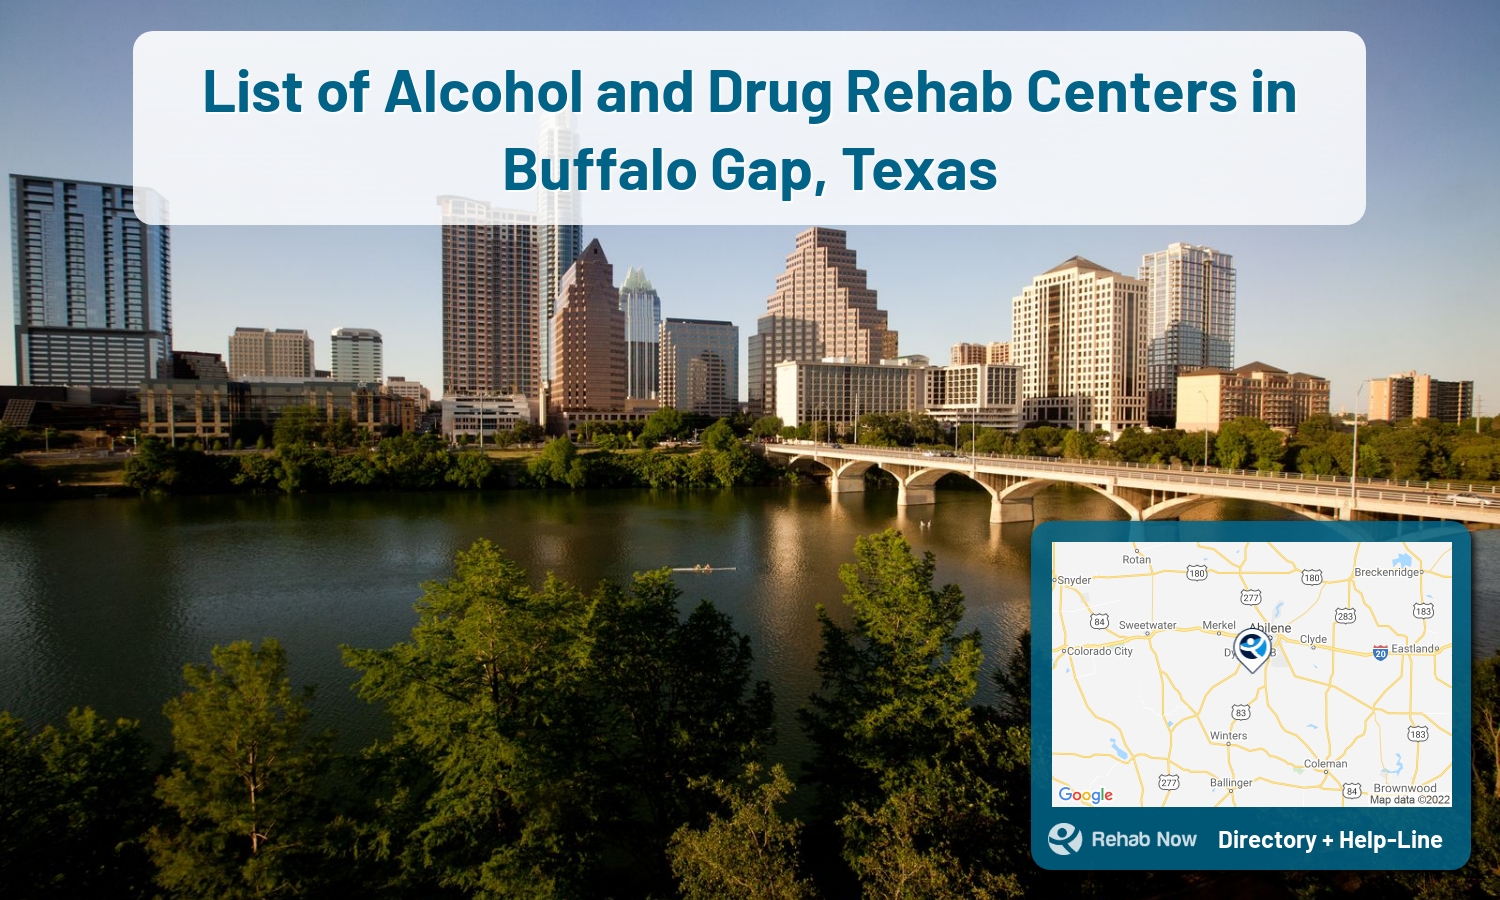 Let our expert counselors help find the best addiction treatment in Buffalo Gap, Texas now with a free call to our hotline.